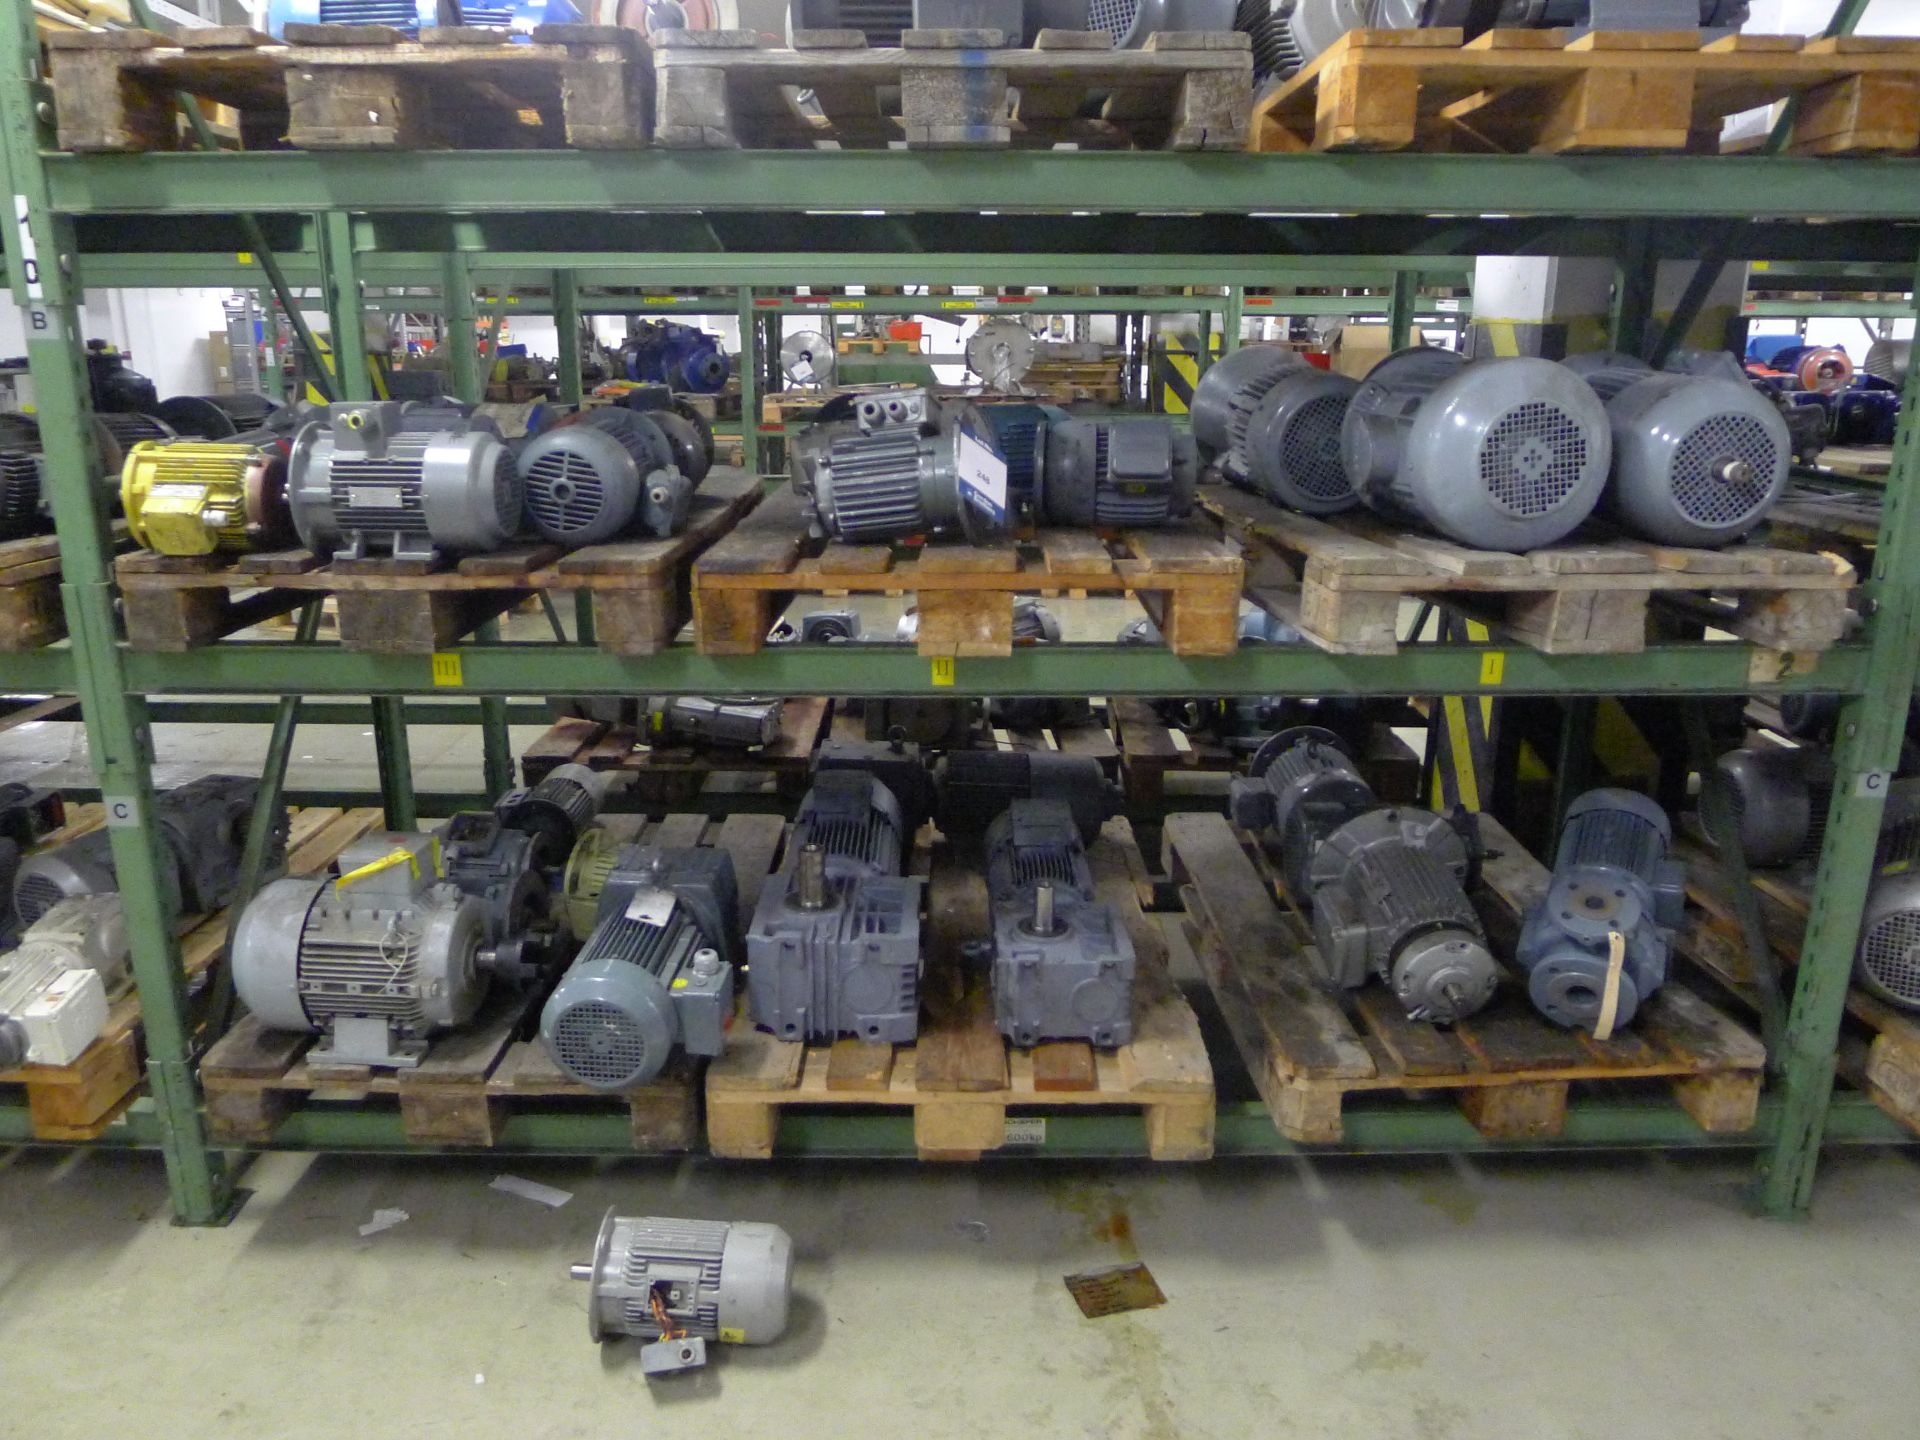 Contents to Racking Bay 7 to Include 38 SEW, Electrim, ABM Assorted Pumps, Motors and Drives (